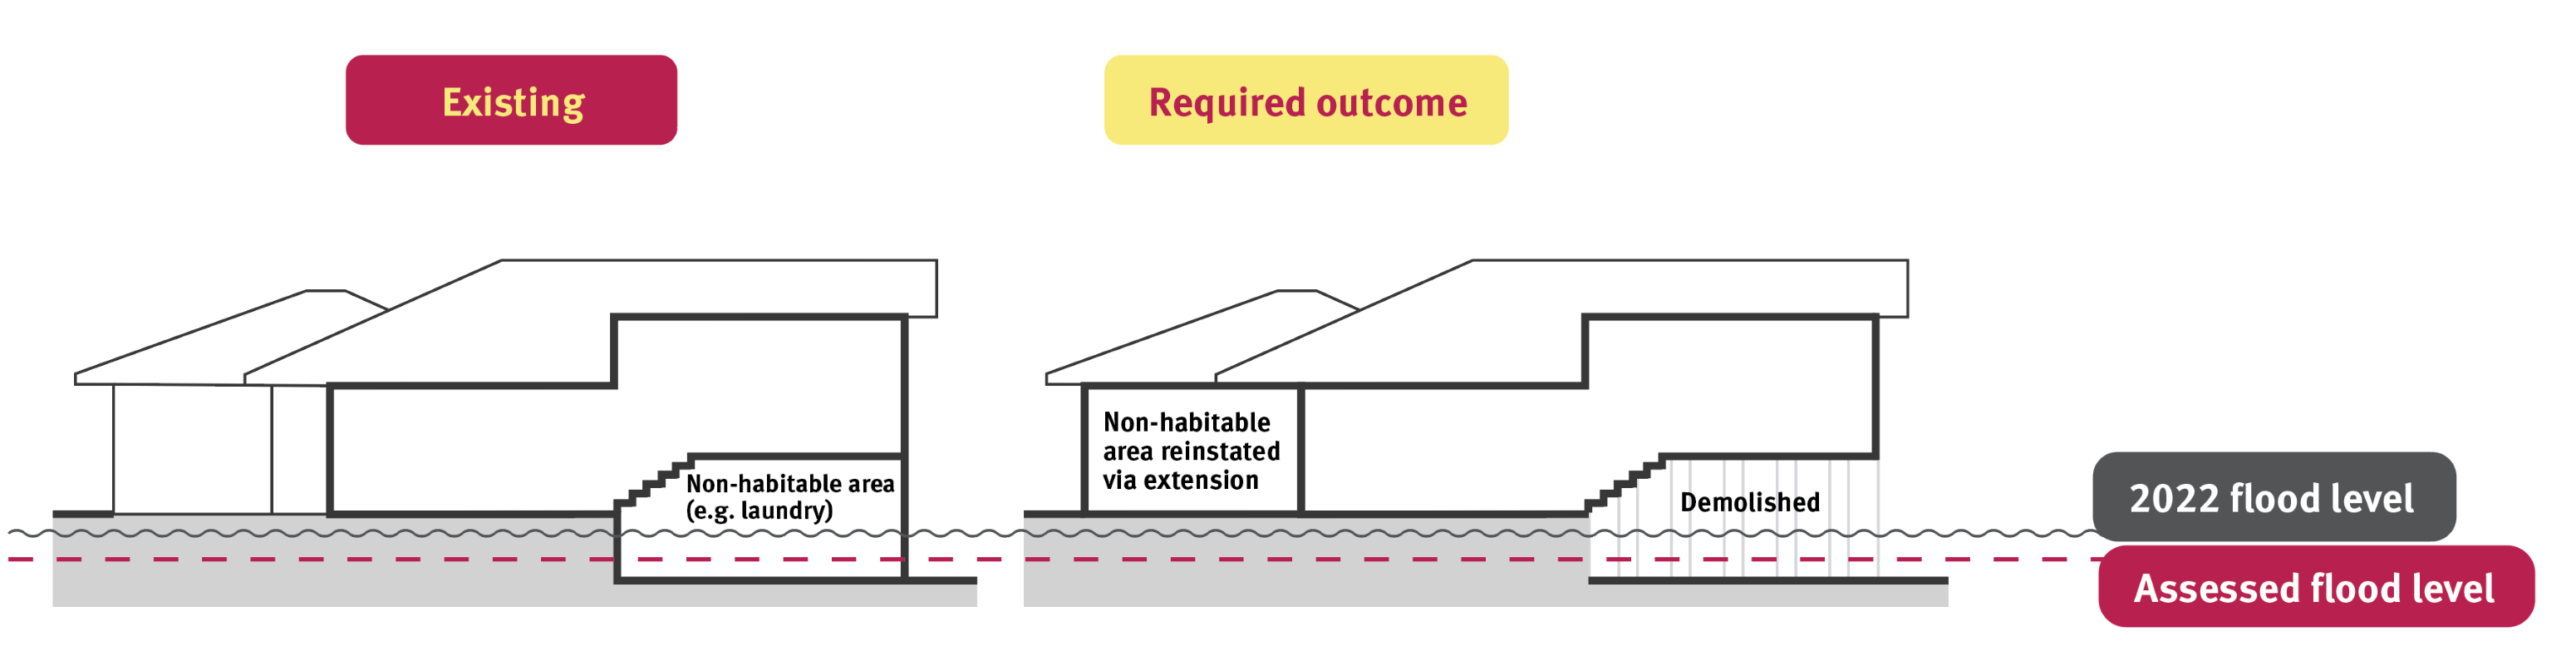 Low set home with enclosed non-habitable room below the habitable floor. Showing existing and required outcome of reinstating the non-habitable area above the assessed flood level via an extension to the home. 